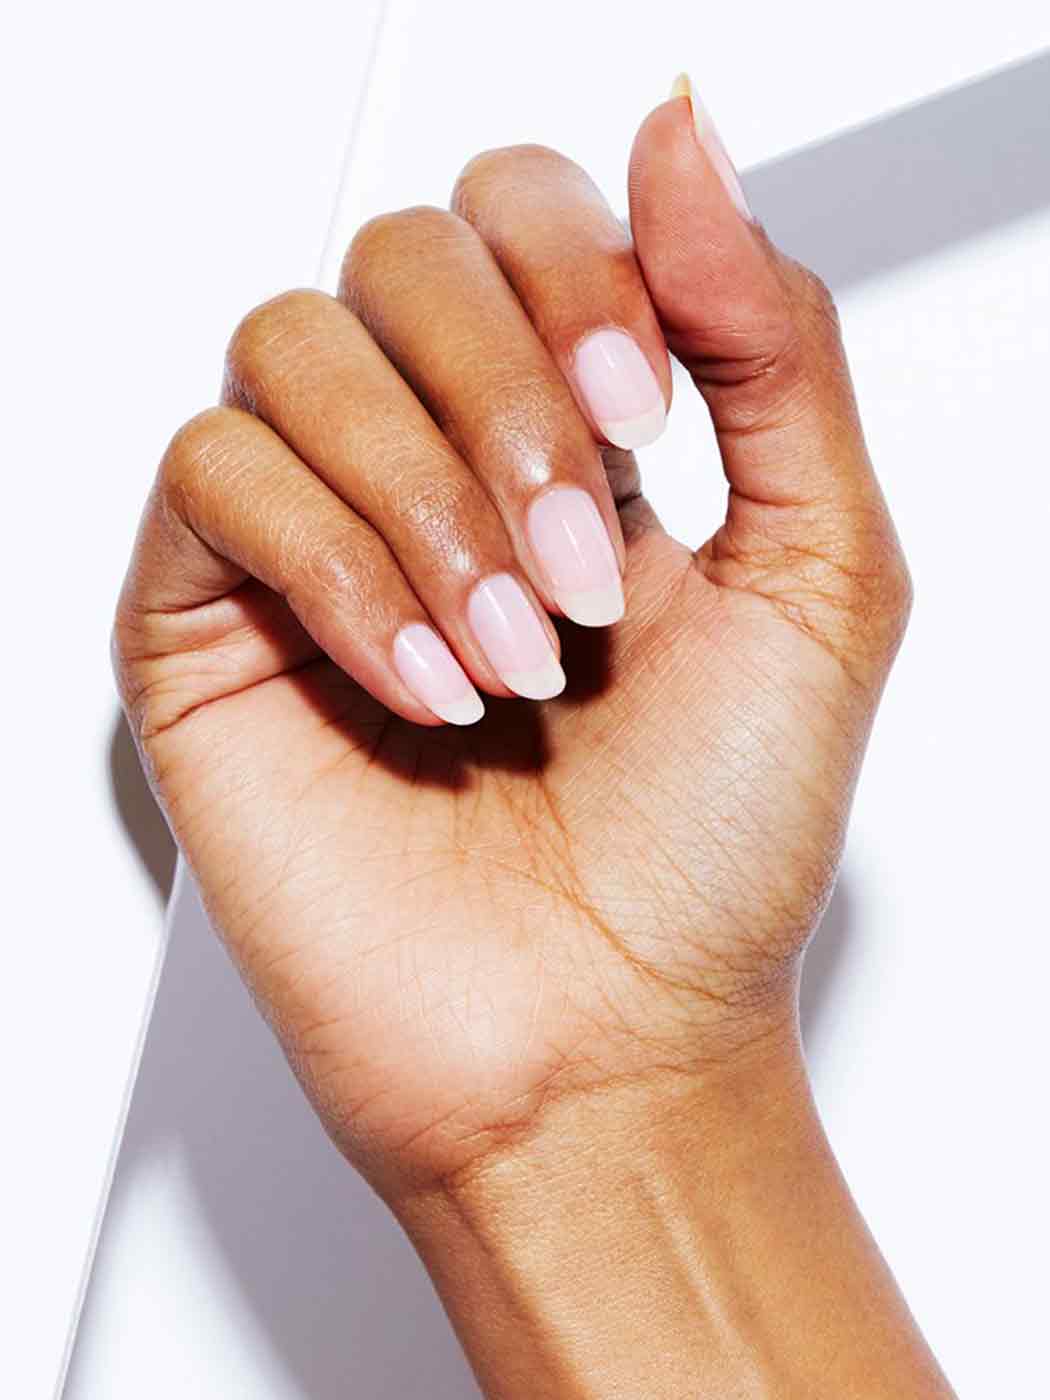 Milky White Nail Polish — Lots of Lacquer